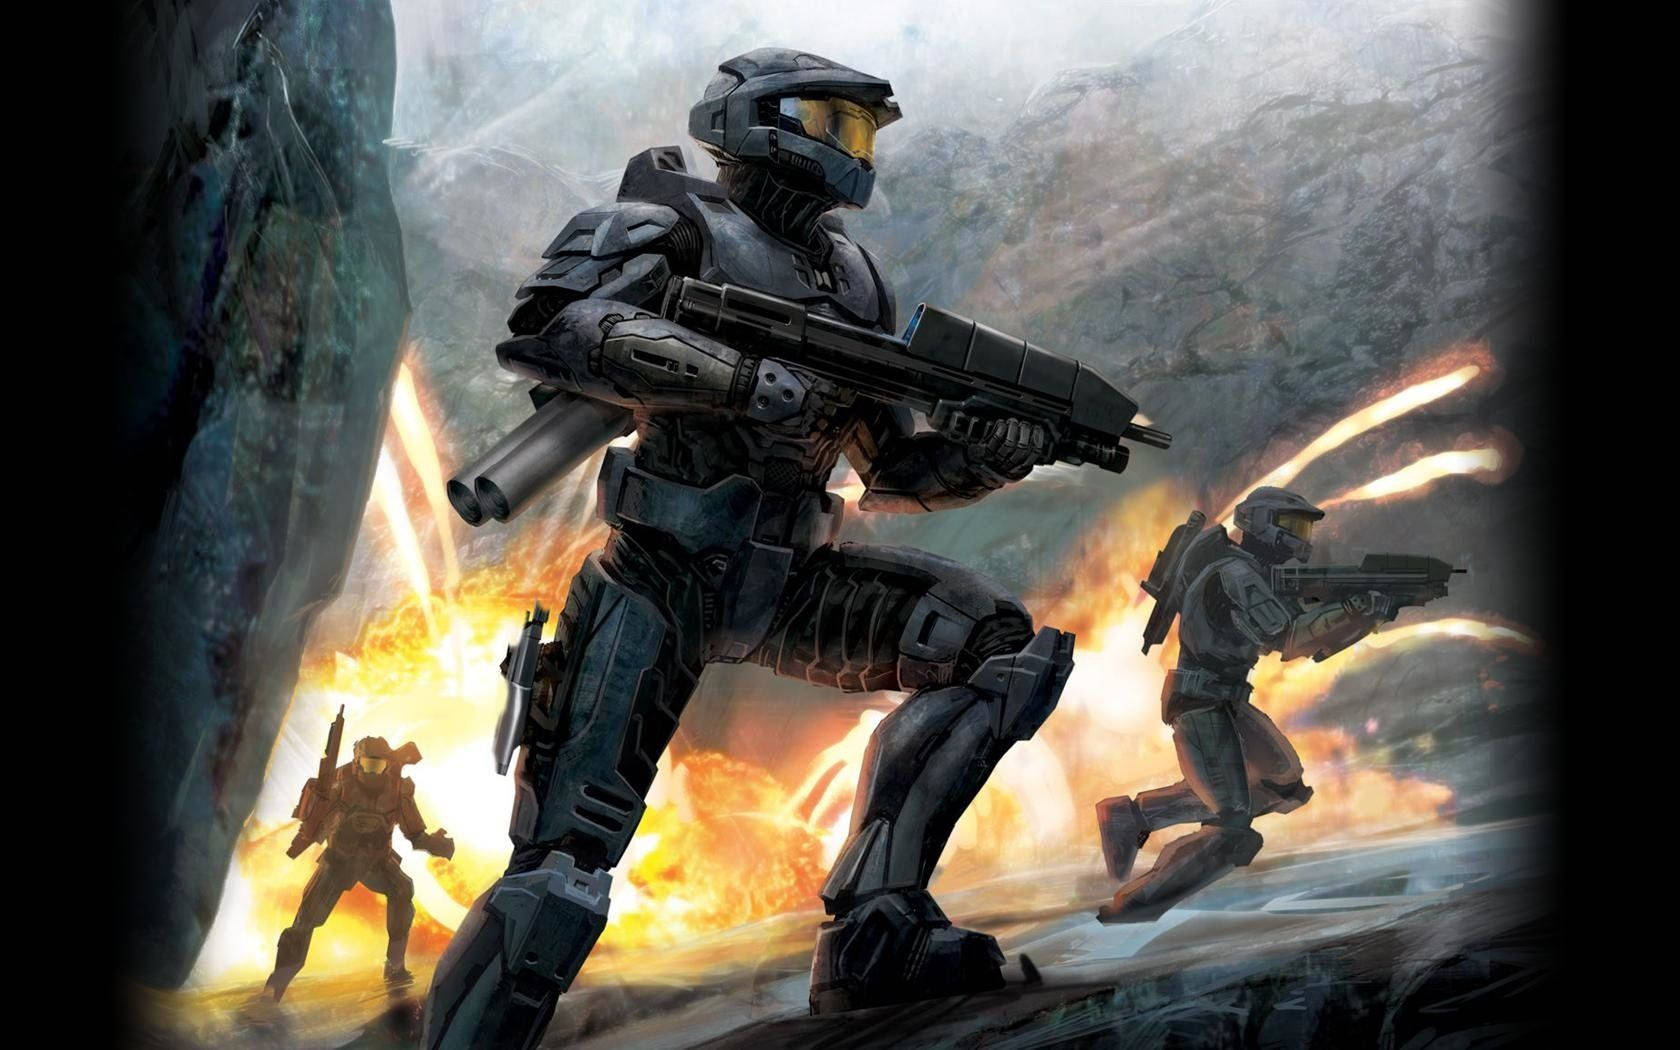 "2 Spartans Locked in Combat in the World of Halo" Wallpaper